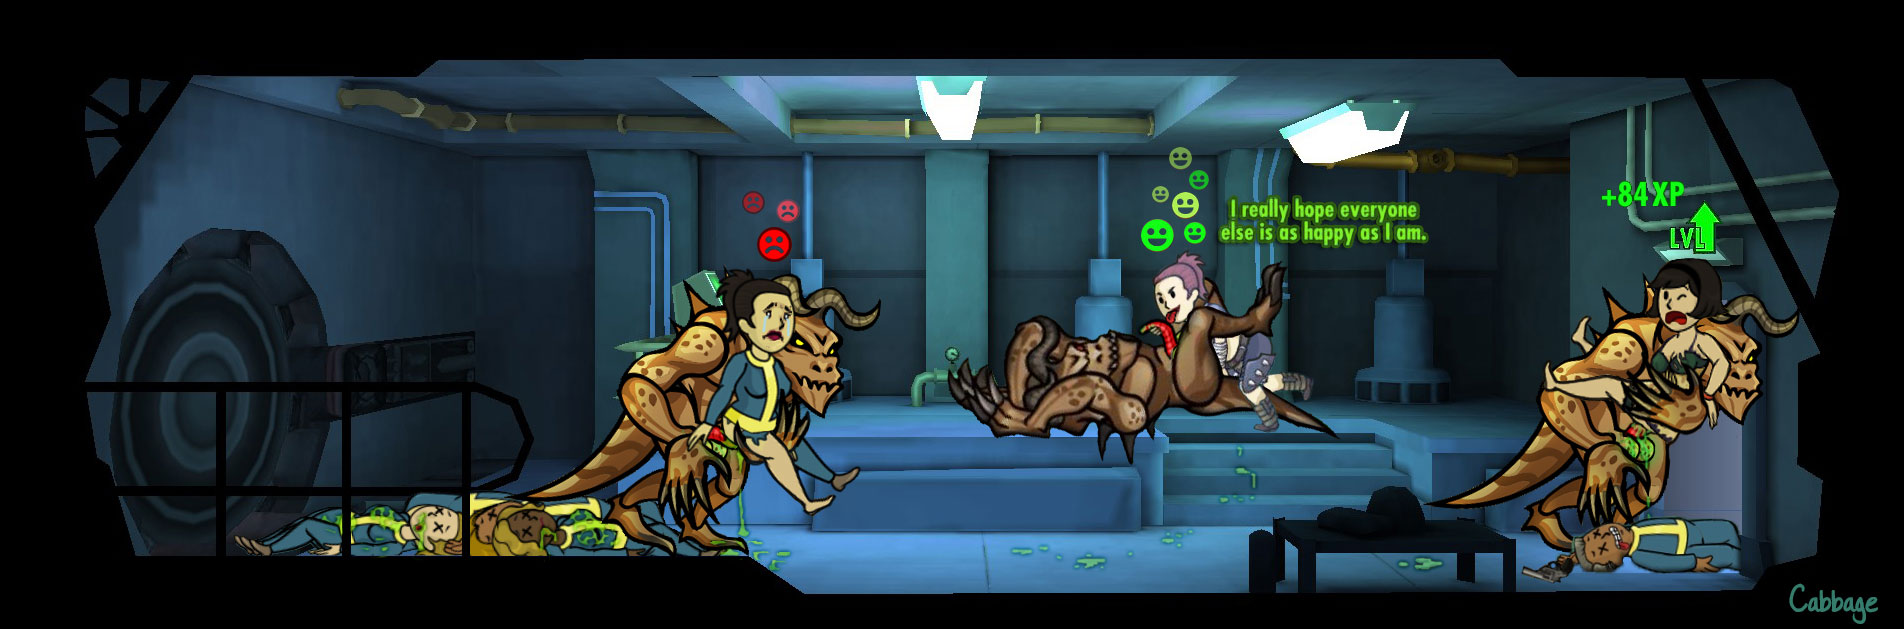 Fallout shelter nude